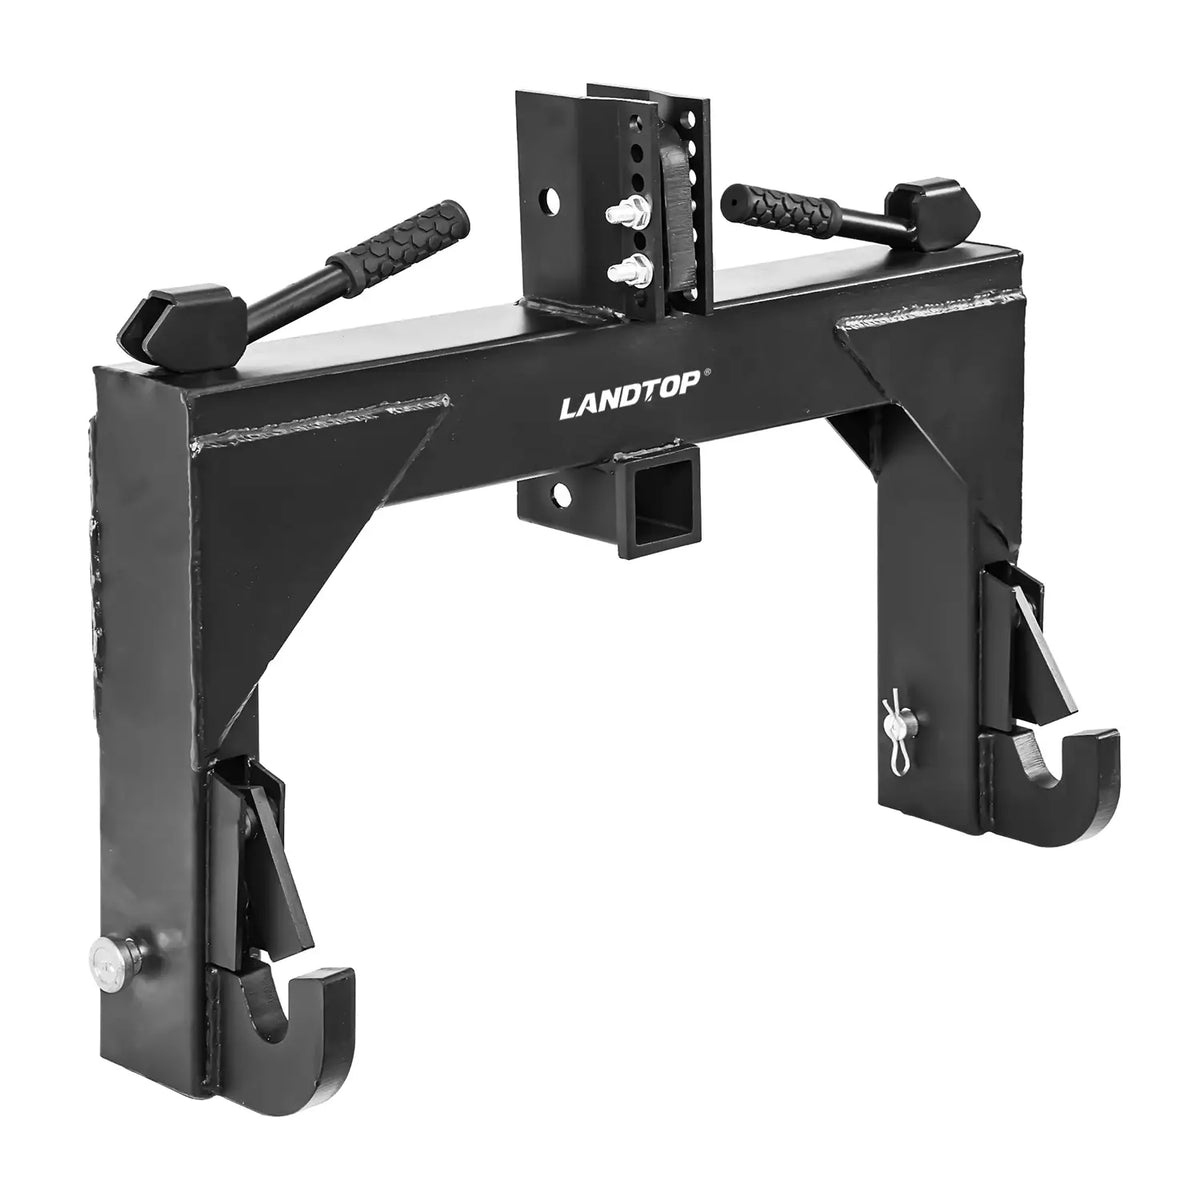 Landtop 3000 LBS 3-Point Quick Hitch｜Perfect 3PT Attachments for ...